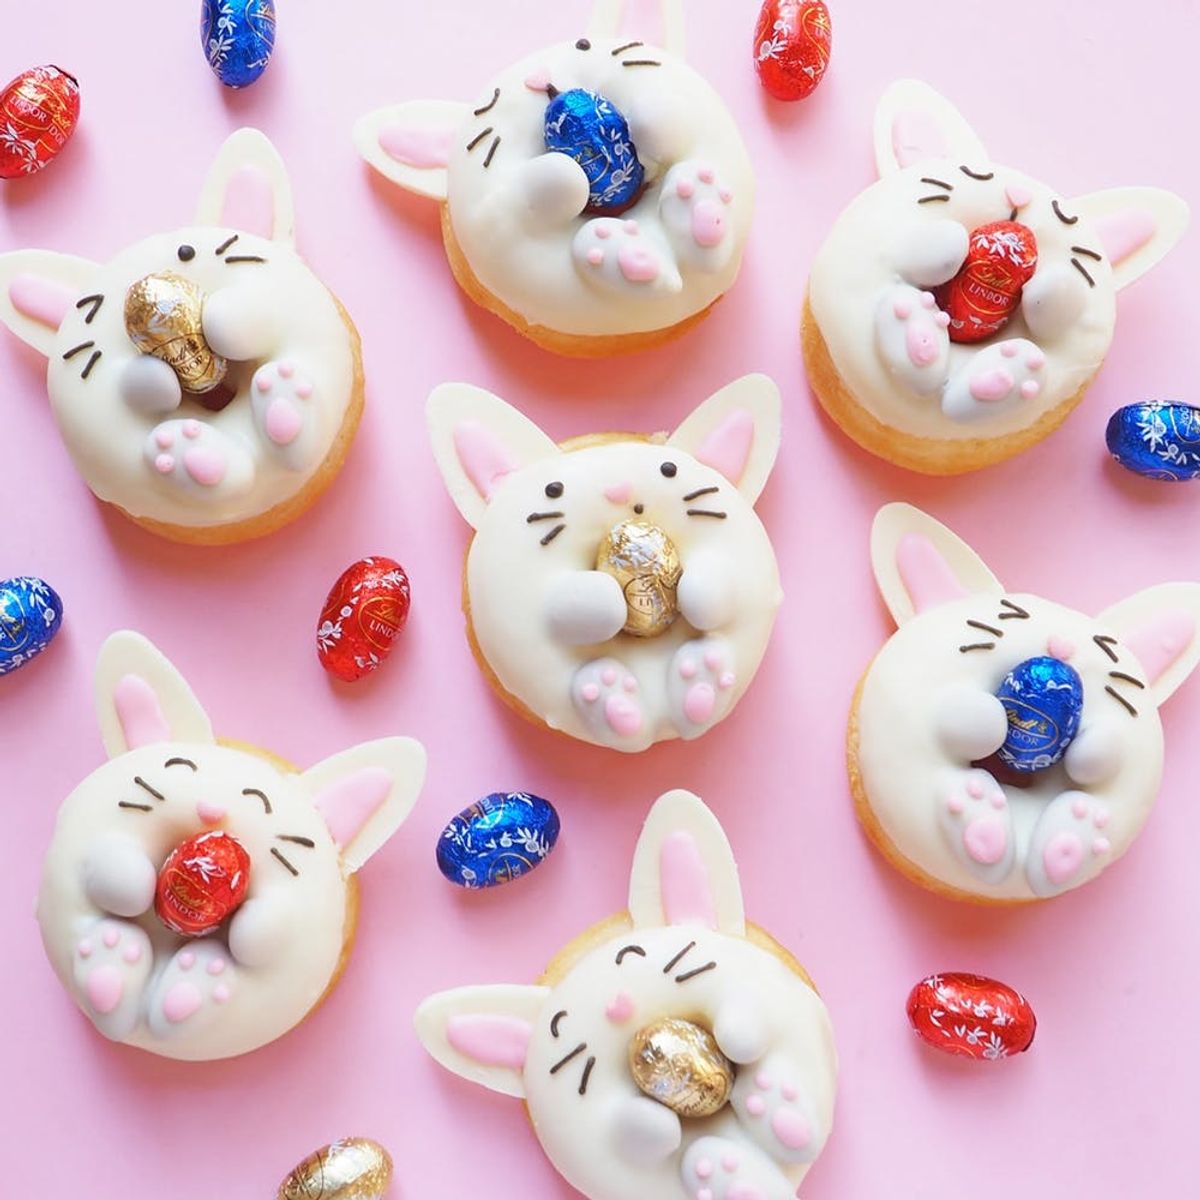 This Adorable Bunny Donuts Recipe Is a Must-Have for Your Easter Dessert Spread